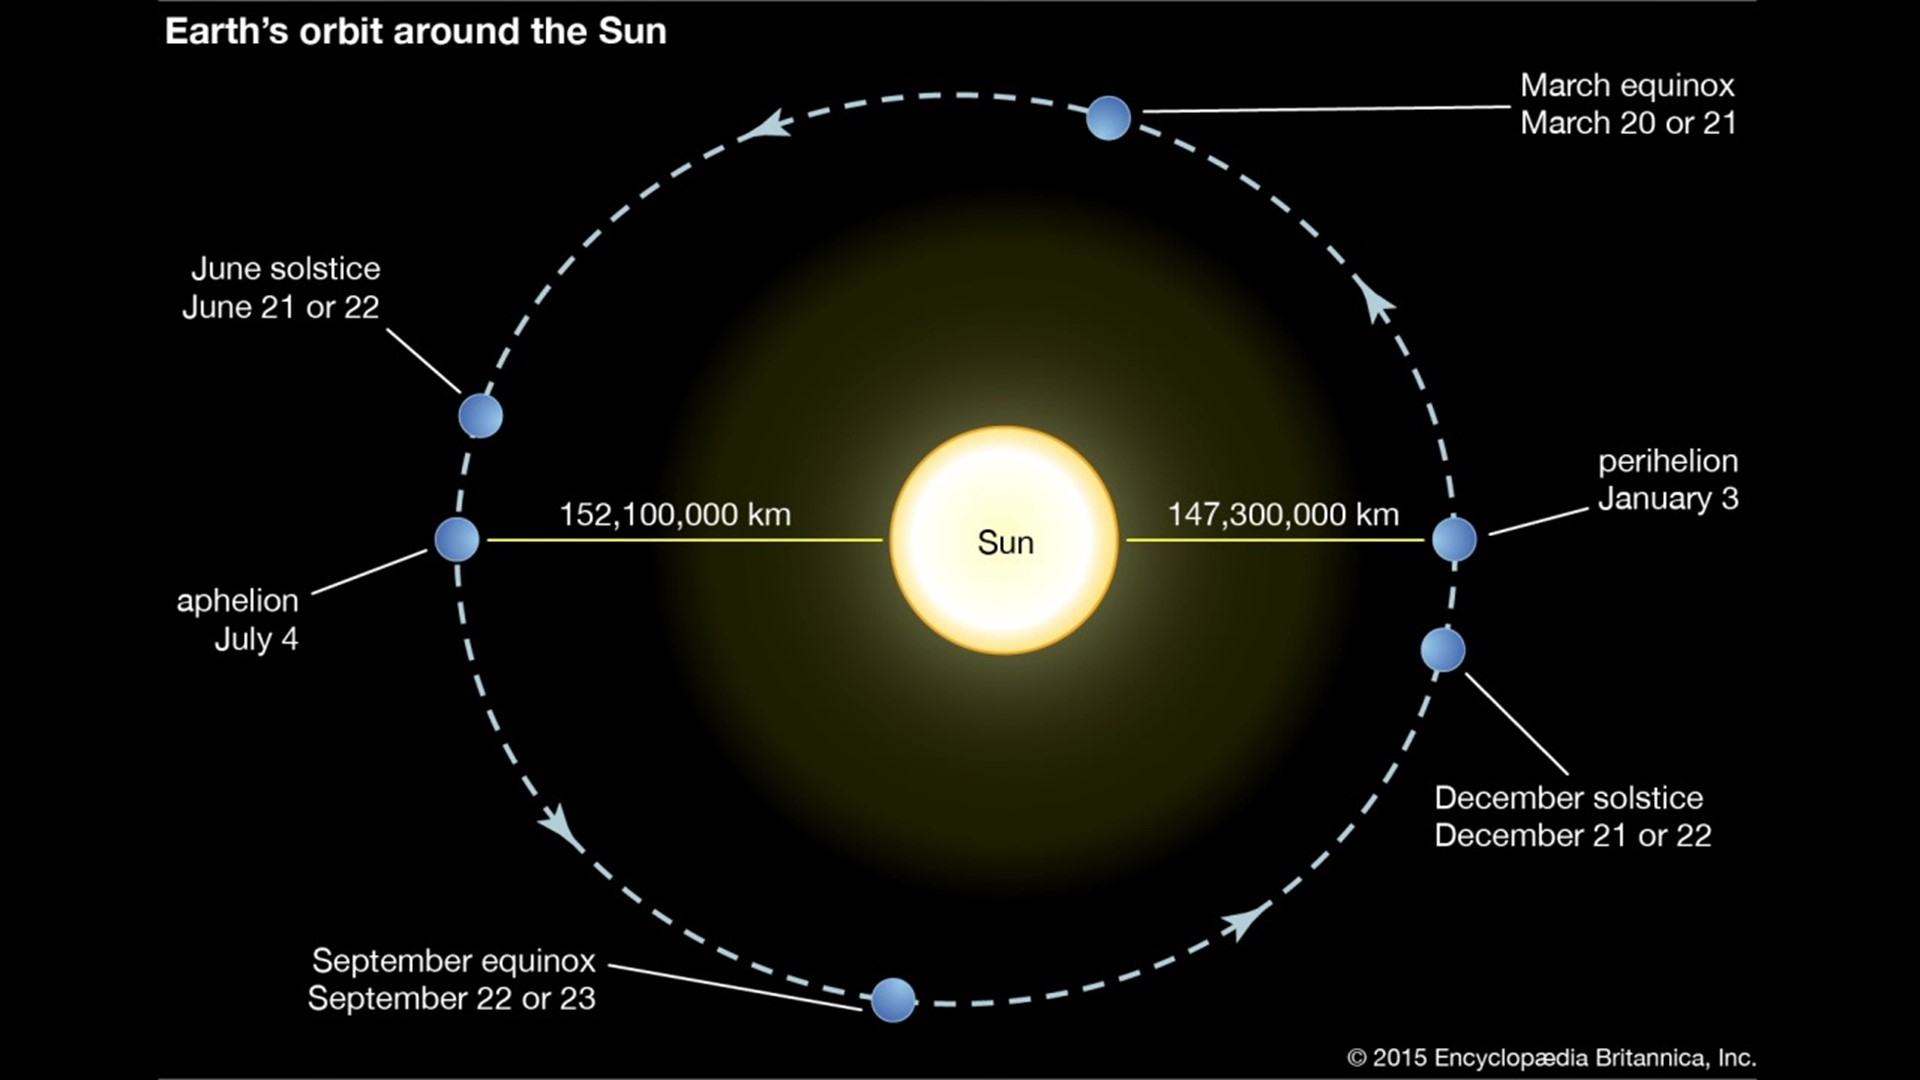 Earth reached its furthest point away from the sun in its orbit.